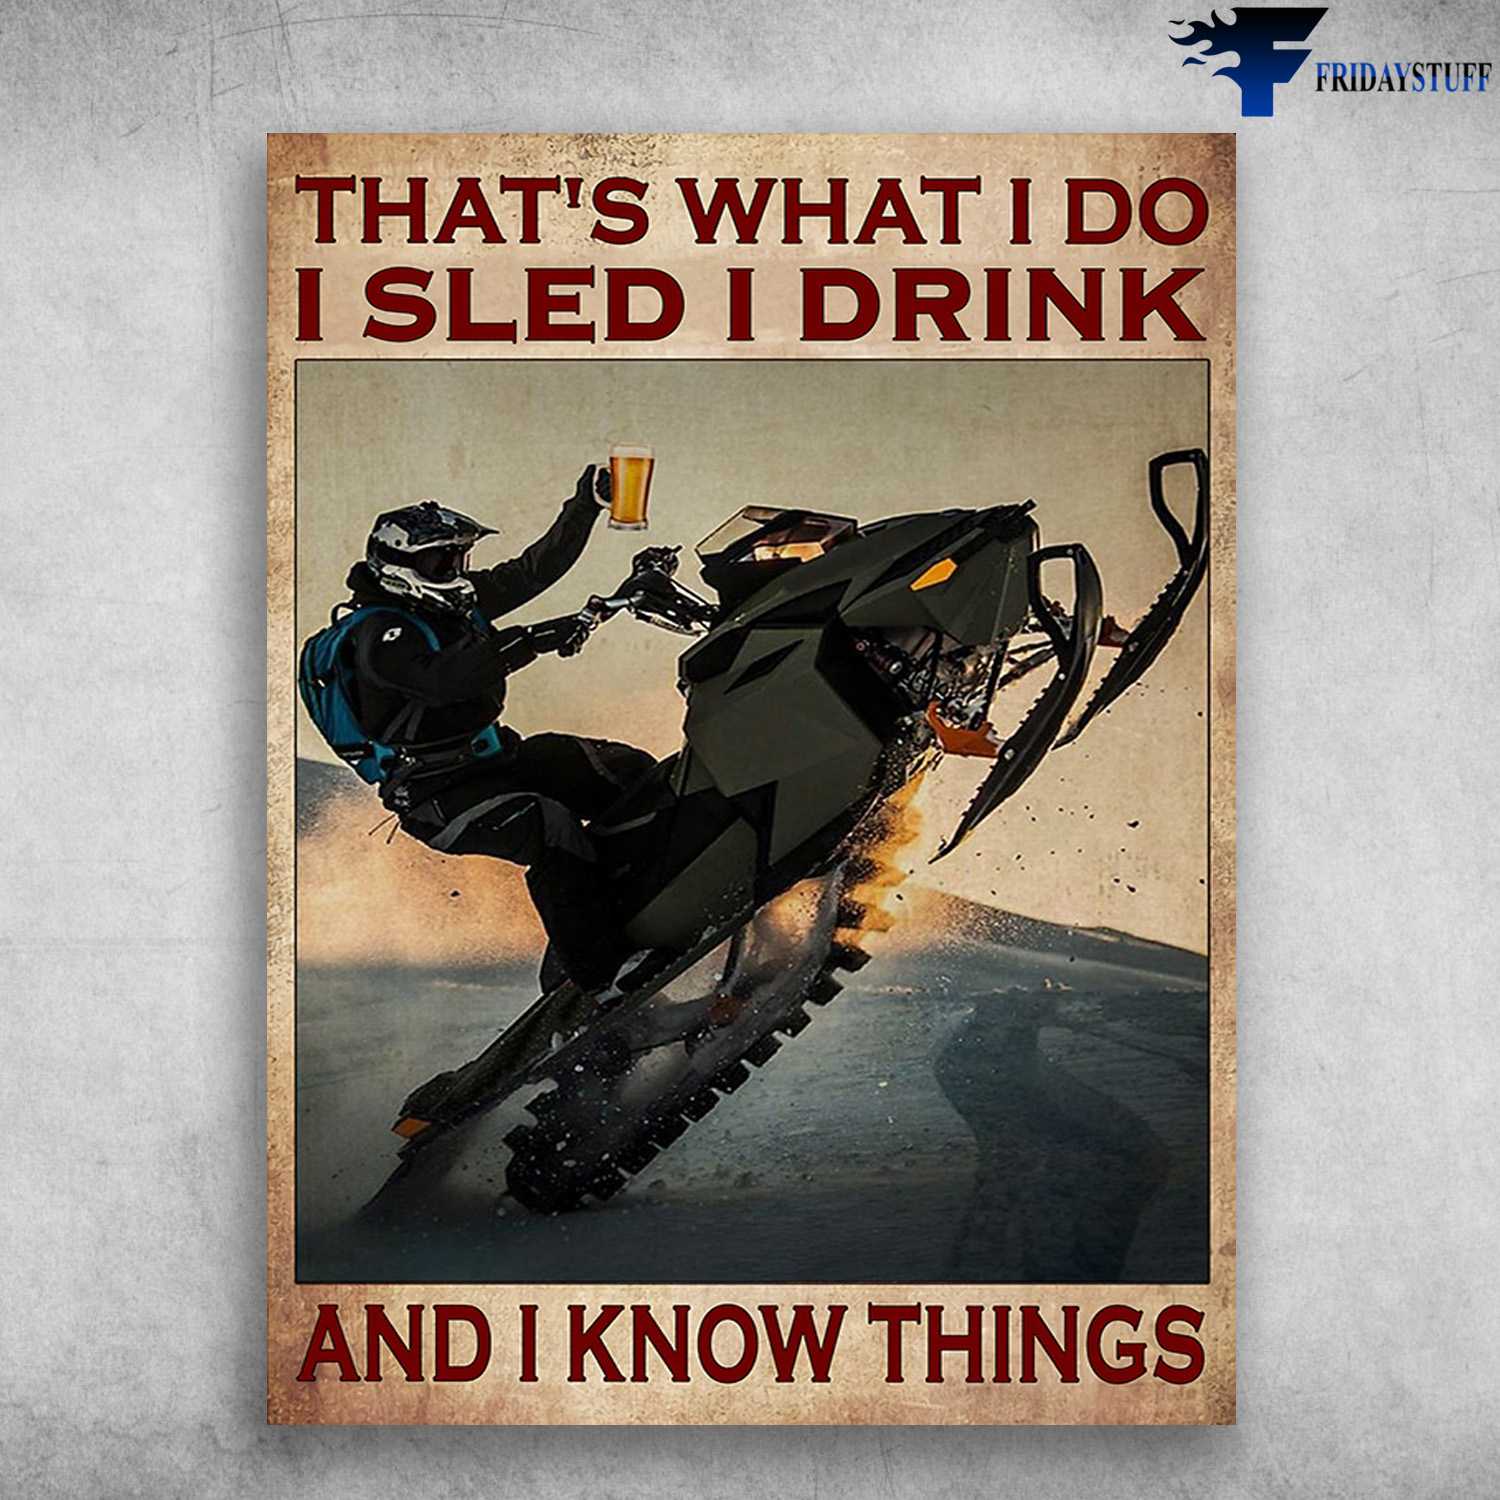 Sleding Man, Sledding Poster - That's What I Do, I Sled, I Drink, And I Know Things, Beer Lover